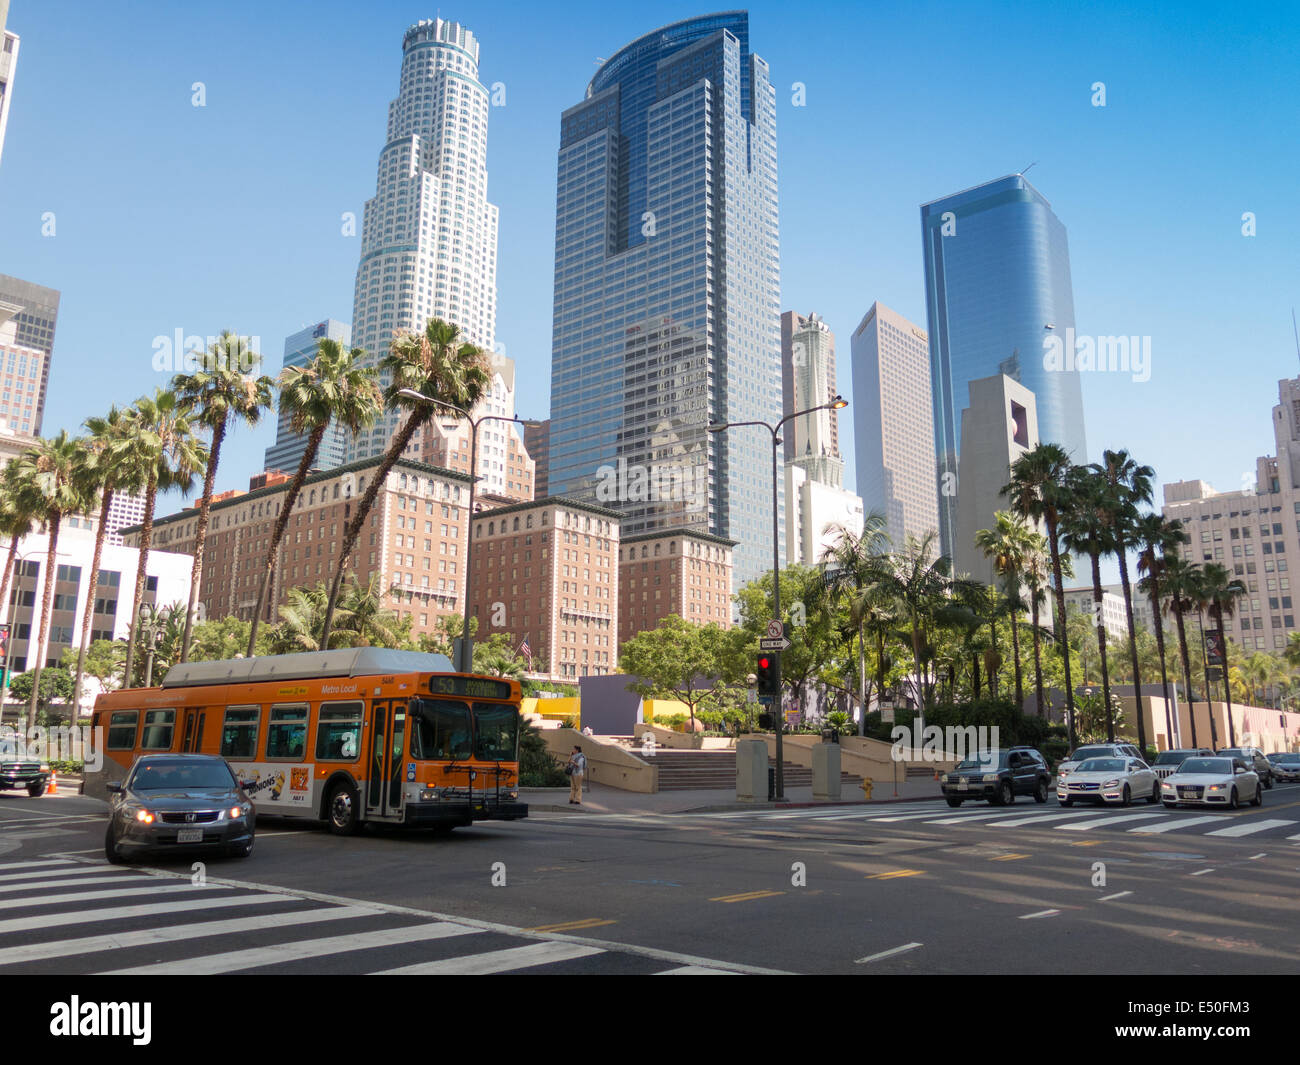 A view of Pershing Square in Downtown L.A., California Stock Photo